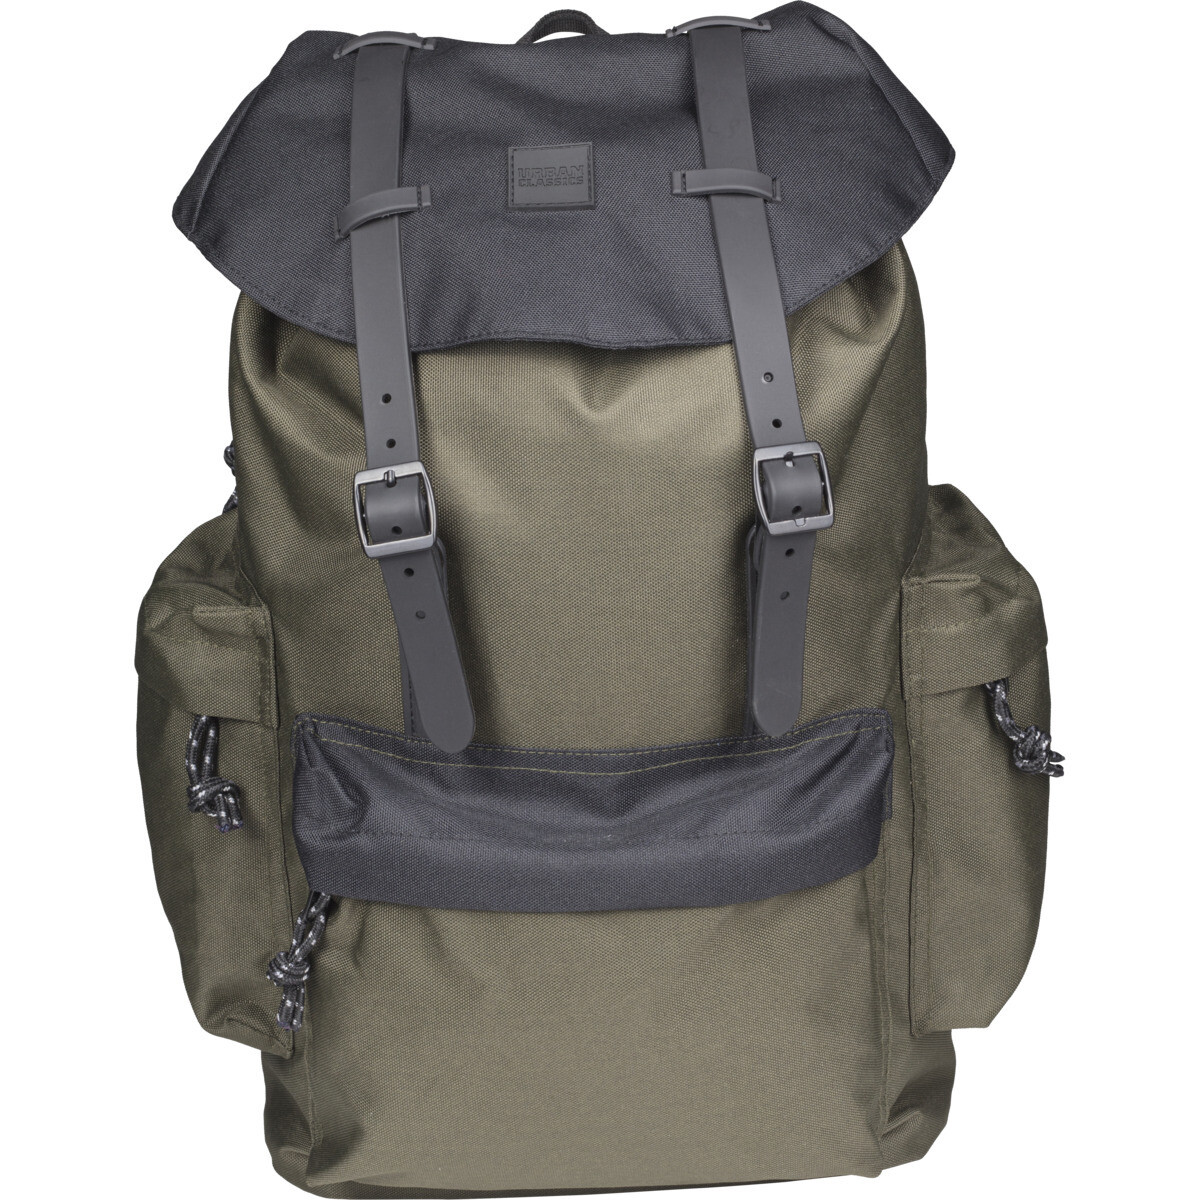 Backpack With Multibags - Olive